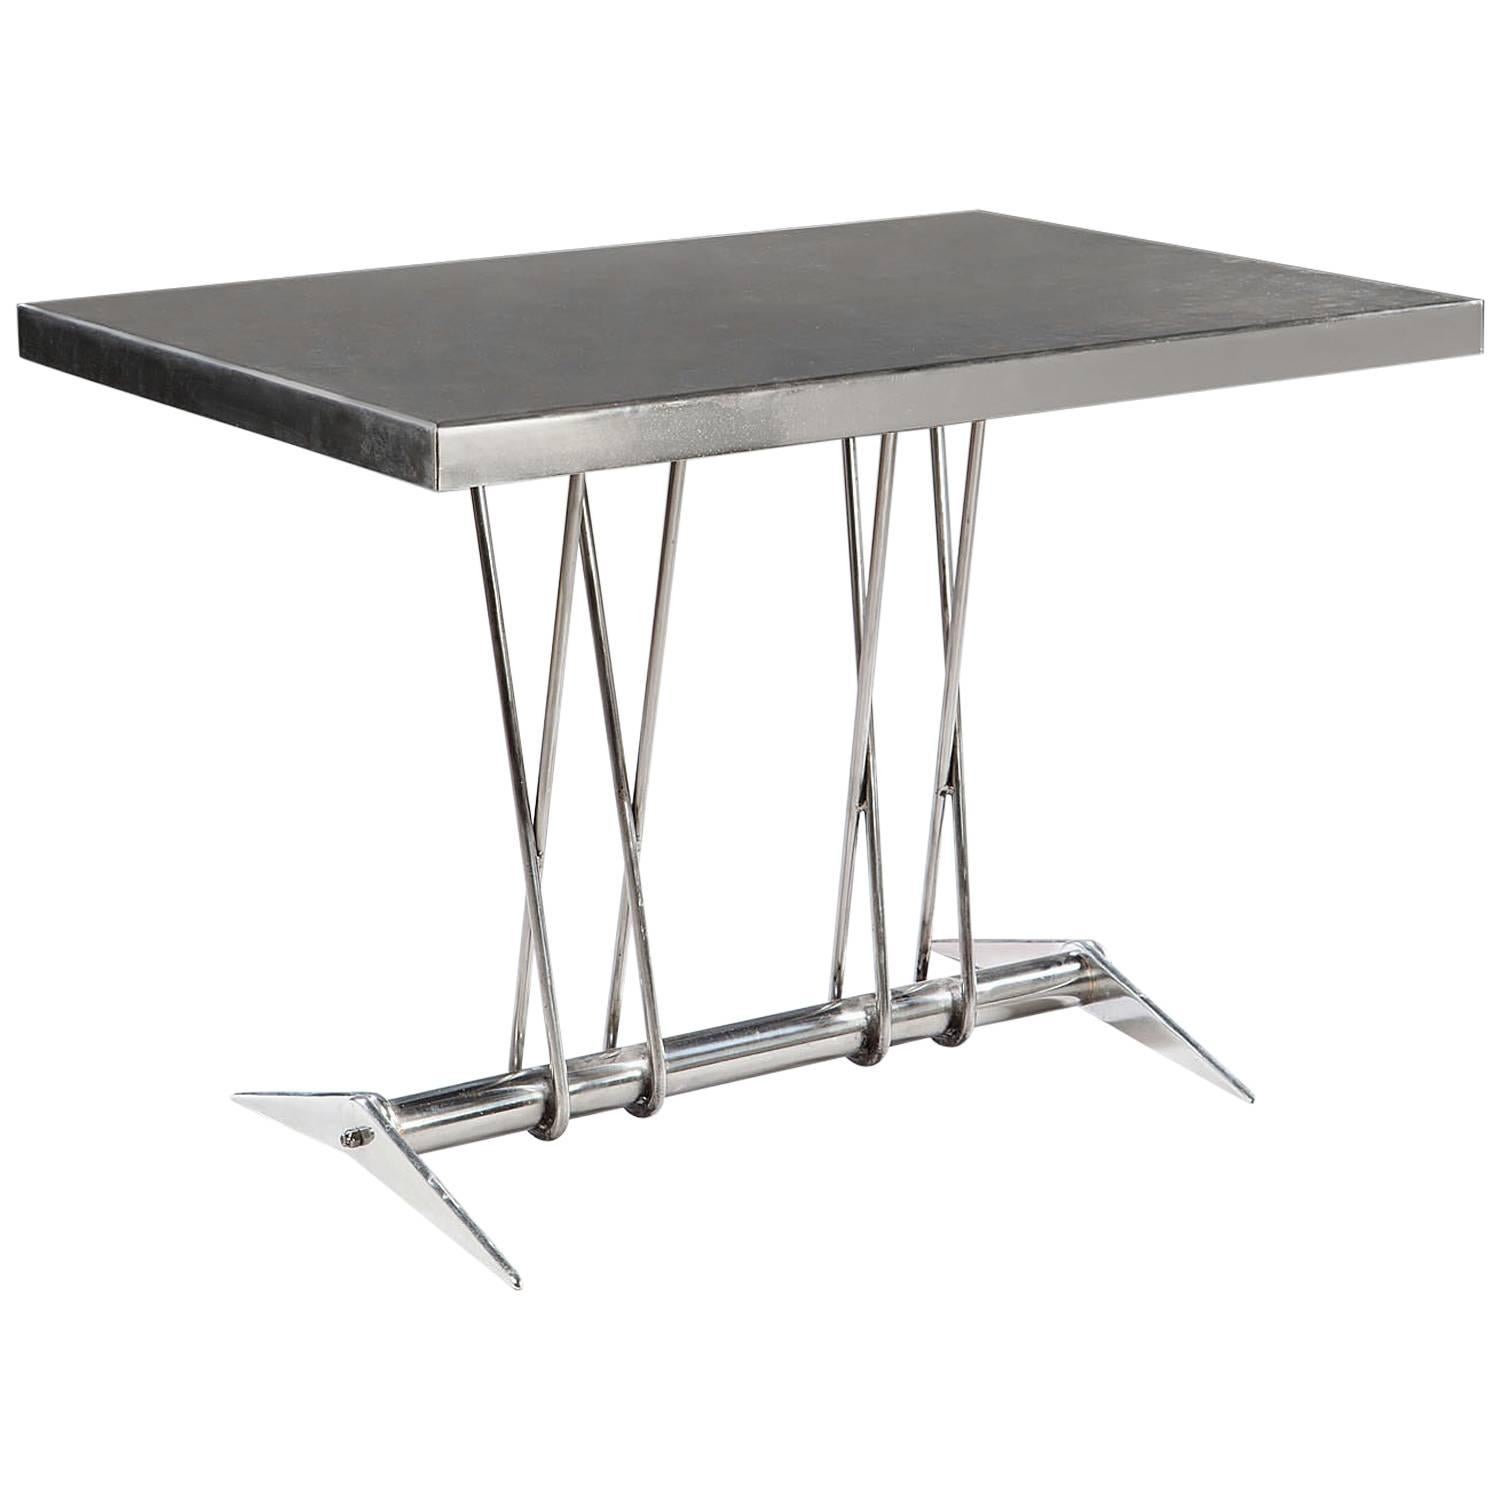 French Modernist Polished Steel Centre Table For Sale